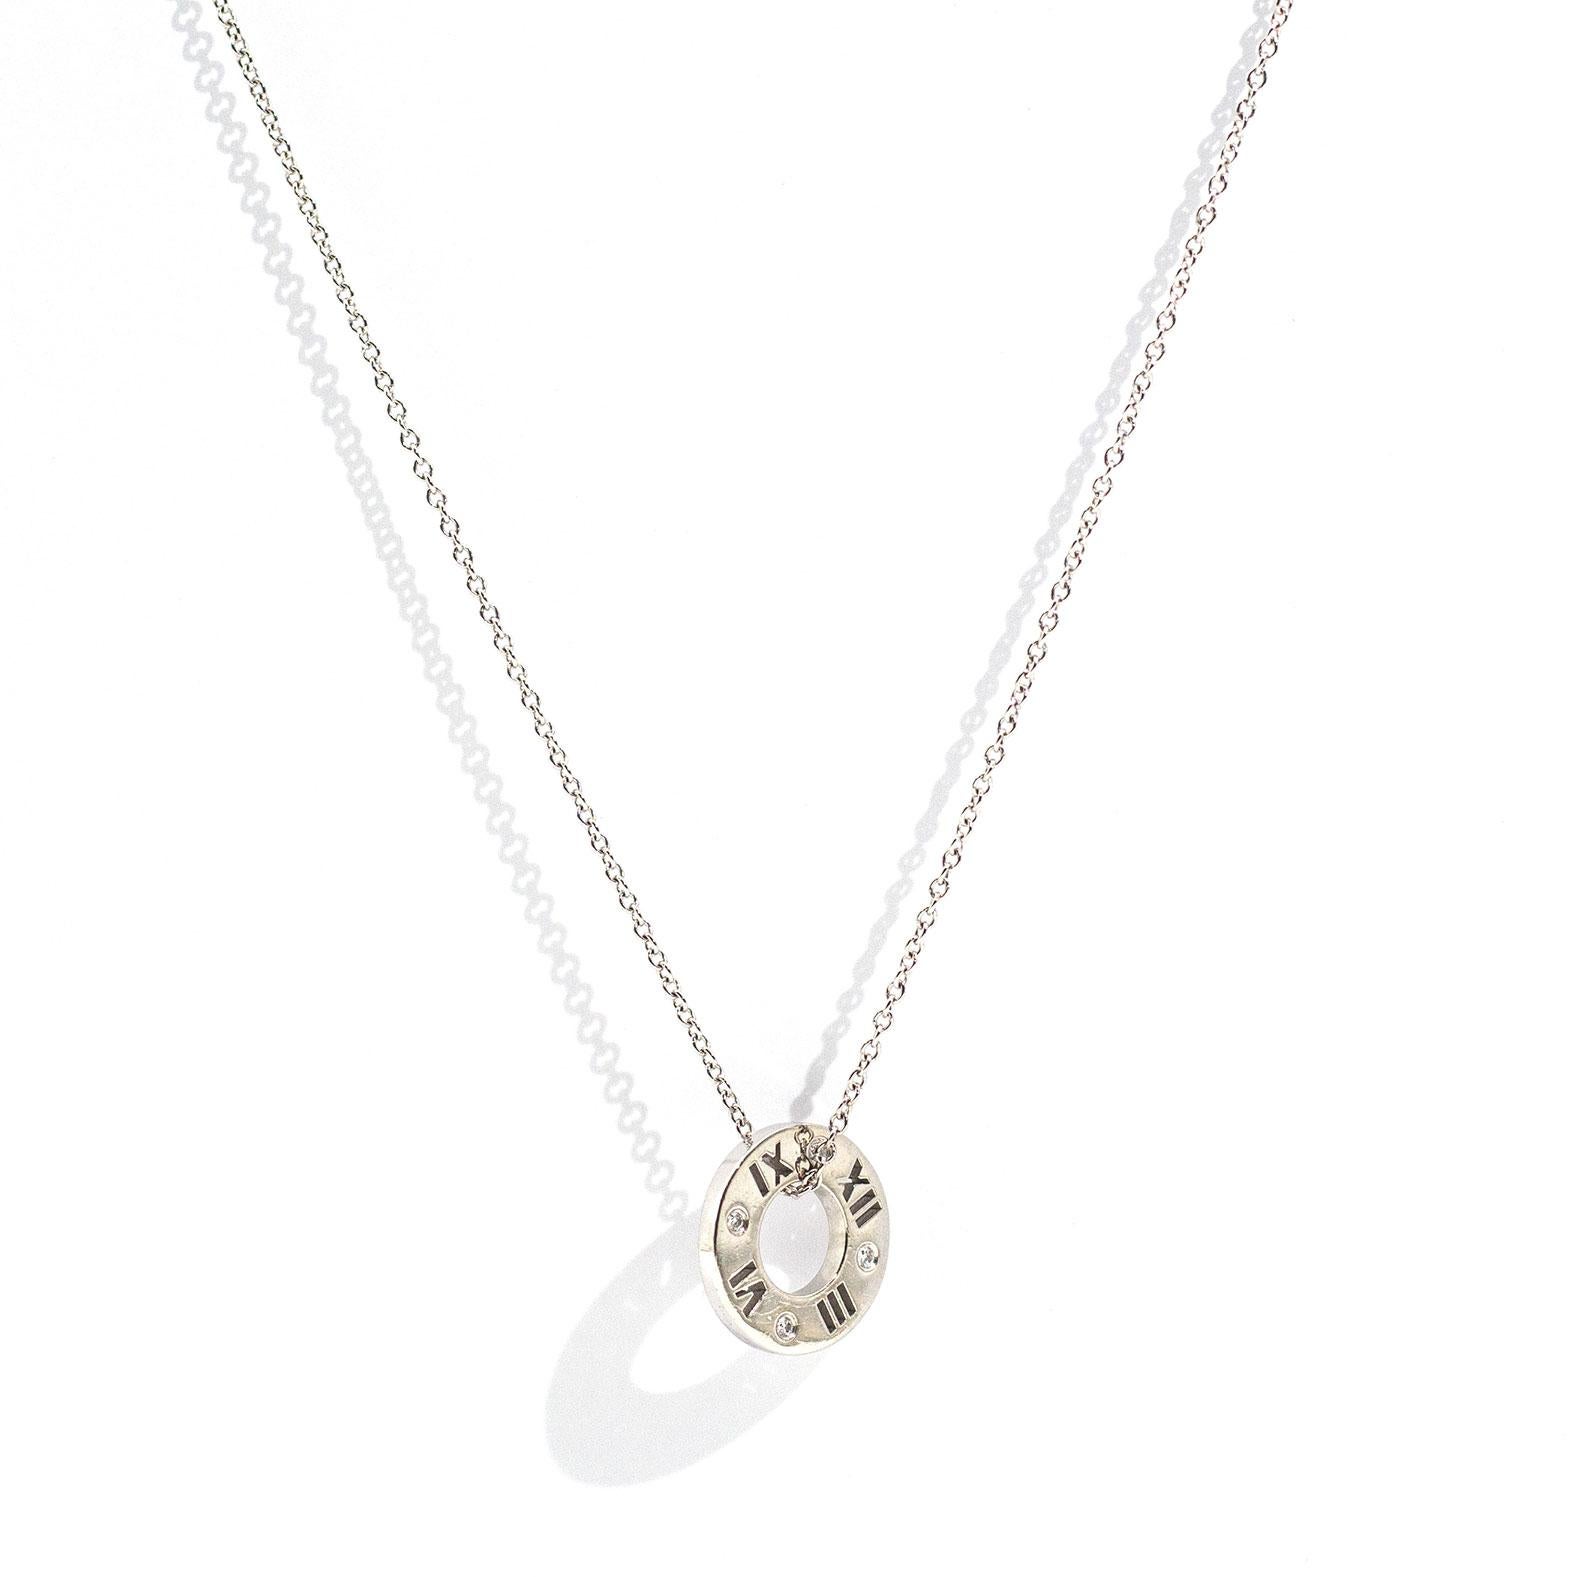 18 carat white gold Tiffany and Co Atlas Pierced Pendant threaded on a Tiffany Co 18 carat white gold chain features four hammer set round brilliant cut diamonds positioned around the pendant on one side. The Tiffany and Co Atlas Pierced Pendant and